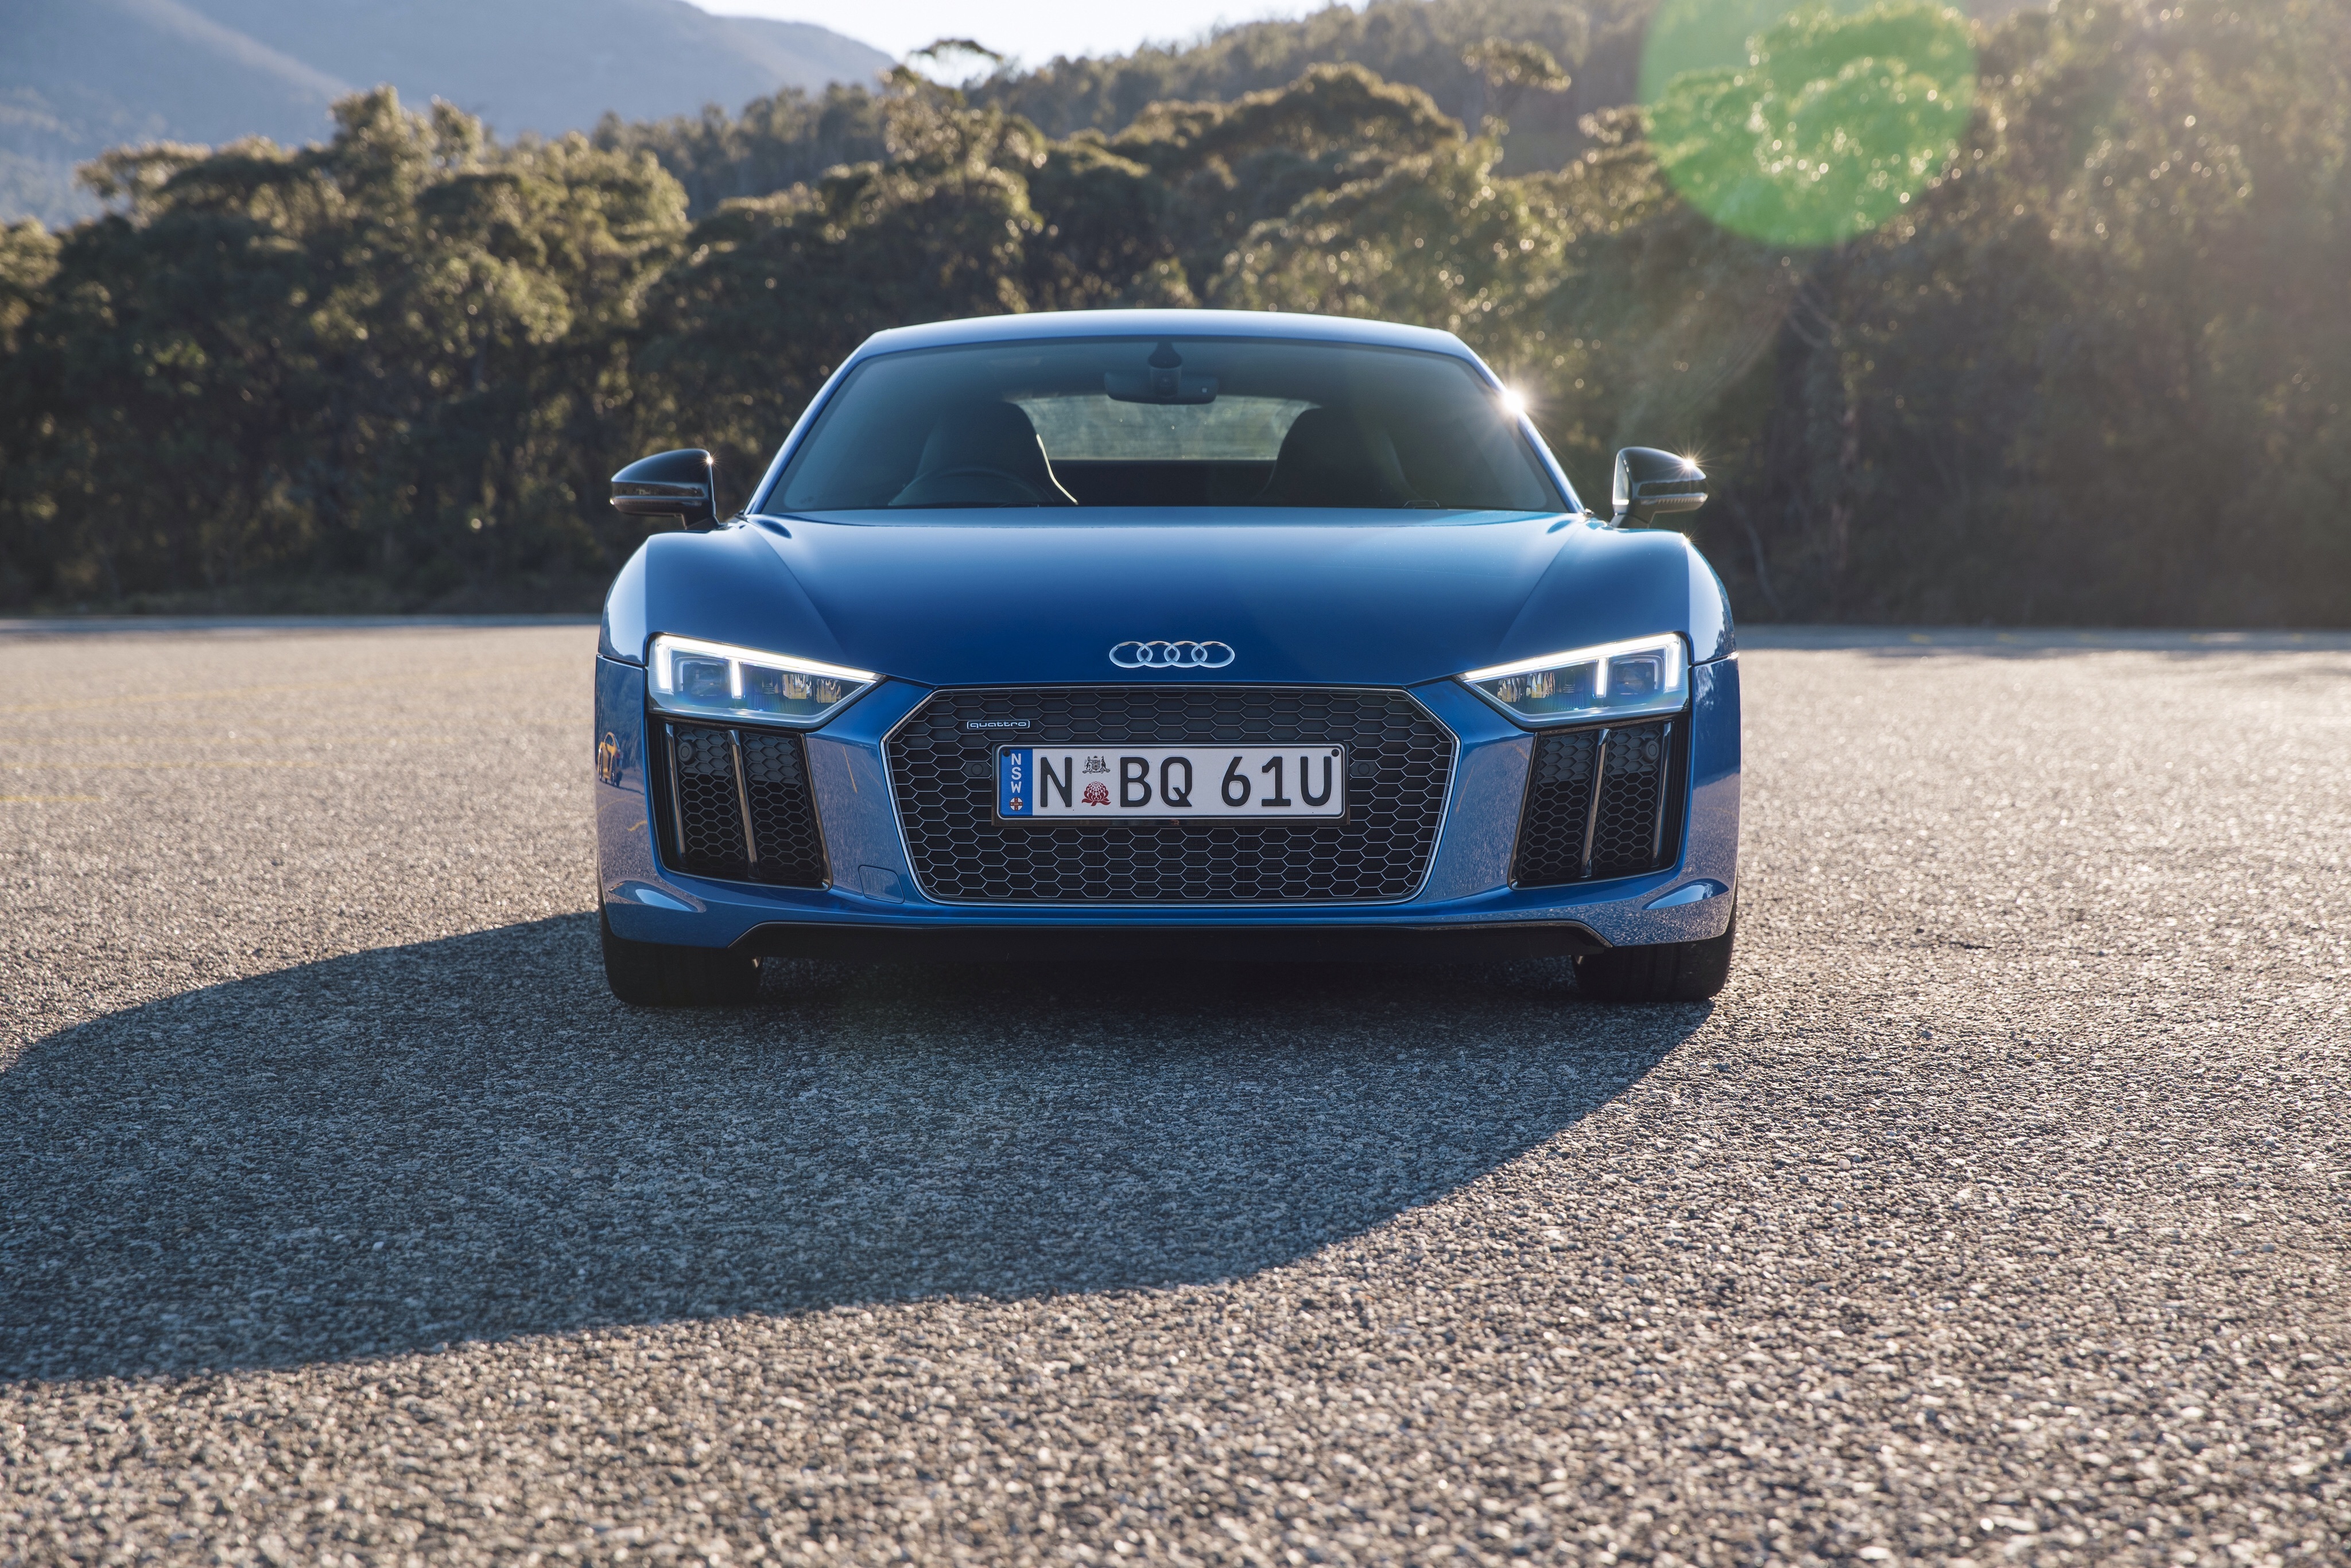 89996 download wallpaper audi, cars, blue, front view, r8, v10 screensavers and pictures for free